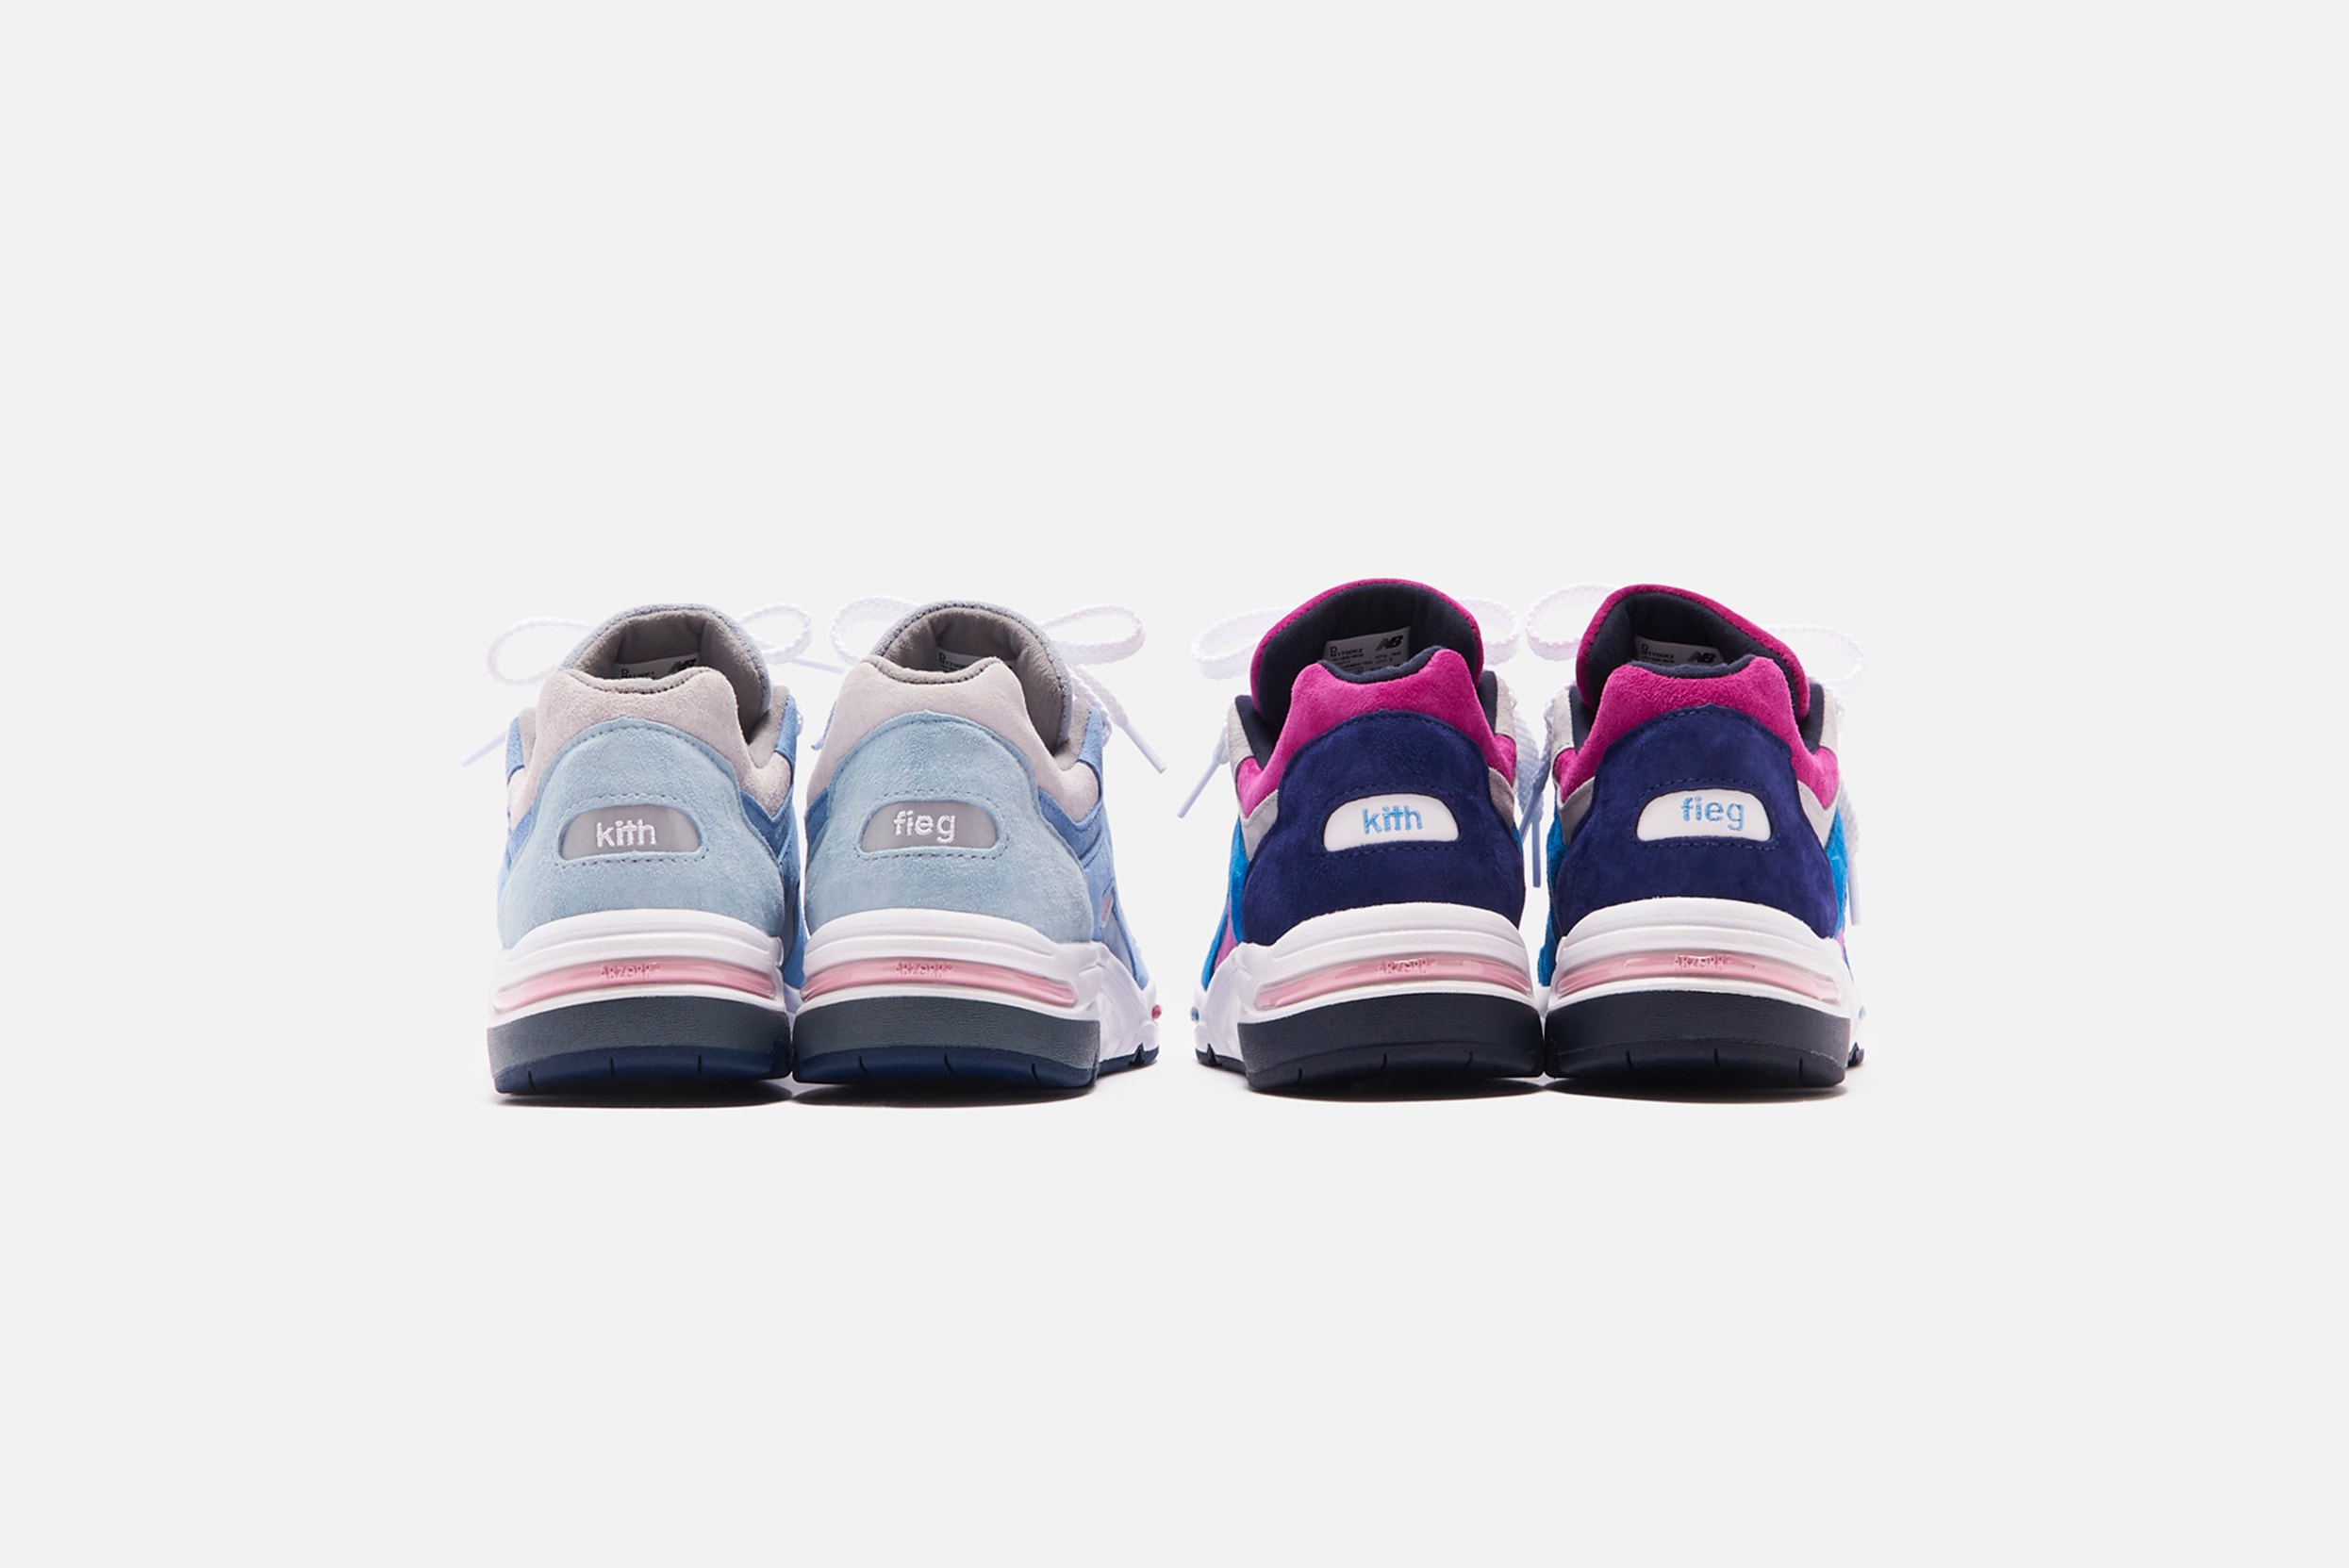 kith ronnie fieg new balance colorist 1700 limited edition sneaker release colors creatives made in usa footwear